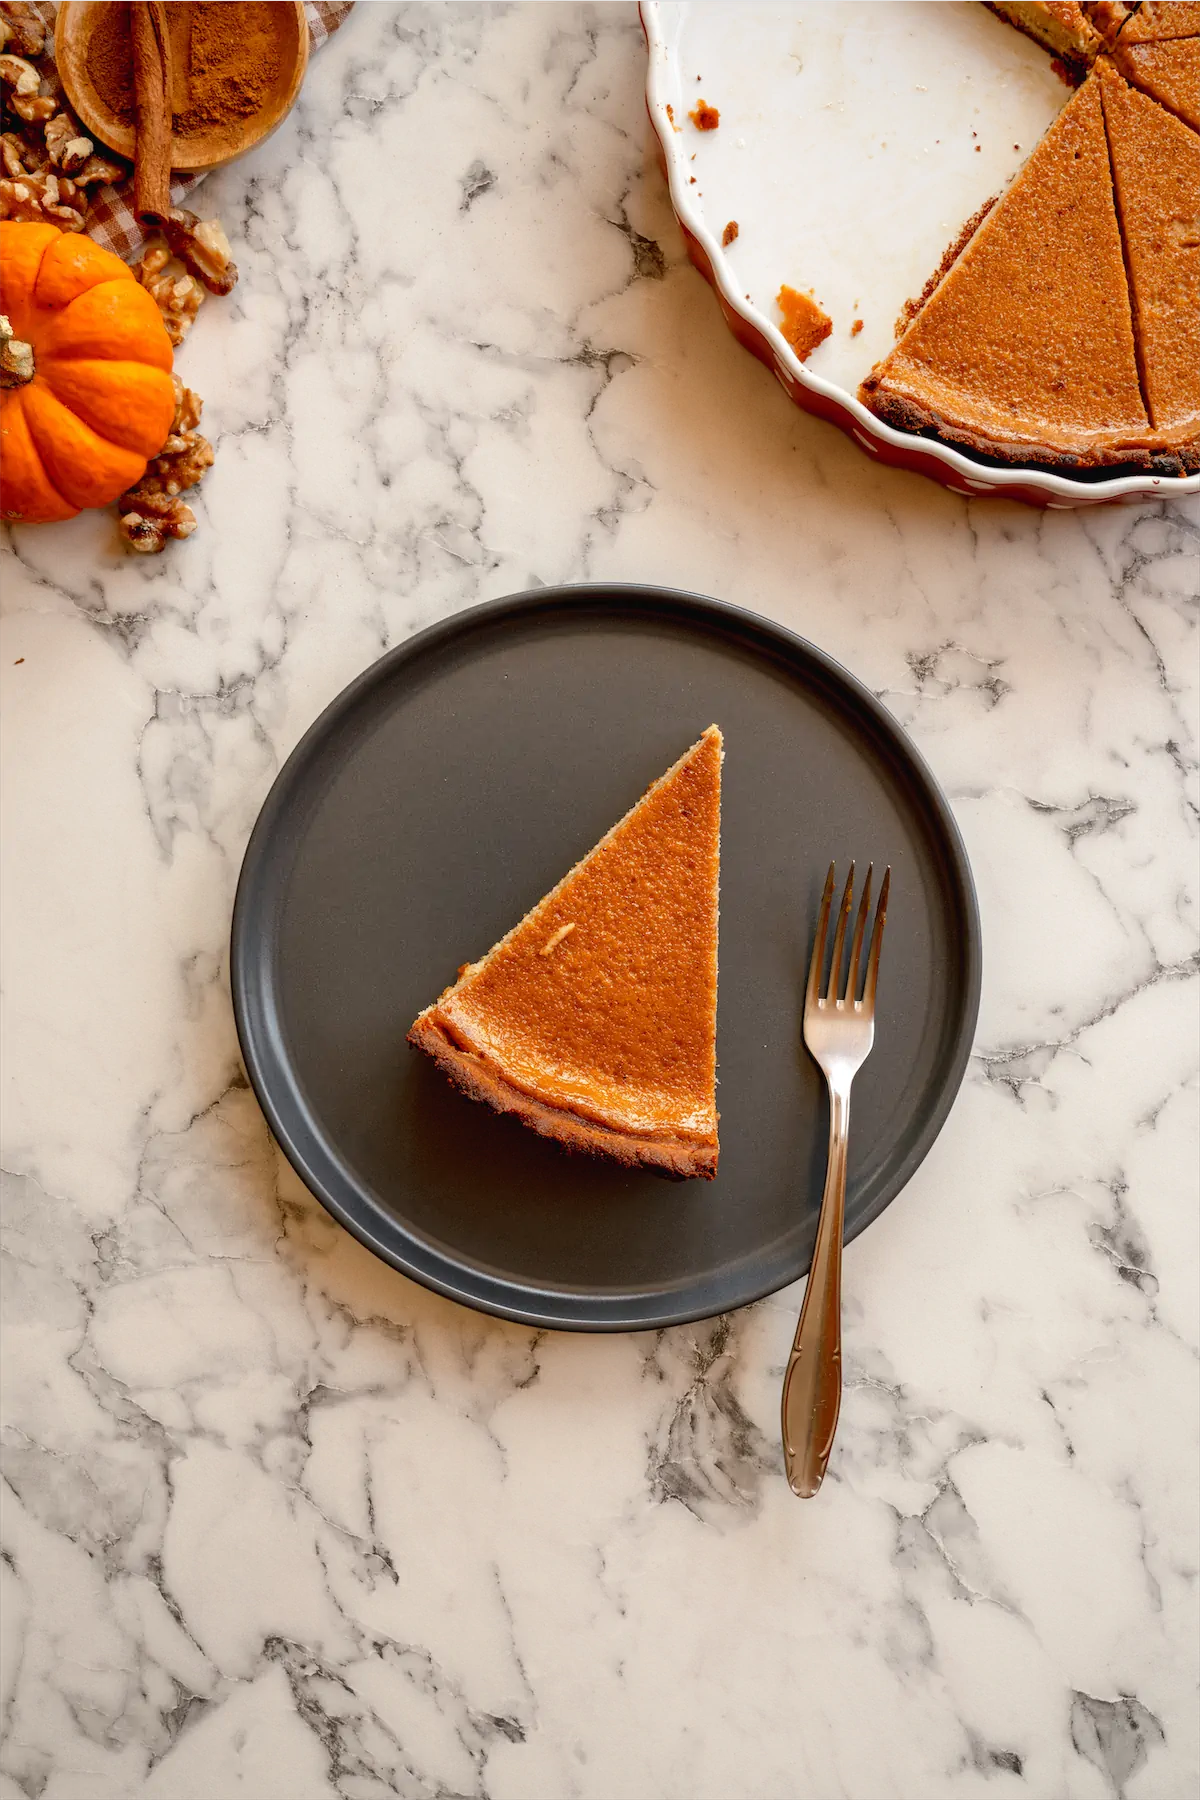 A slice of keto pumpkin pie served on a plate with a fork.